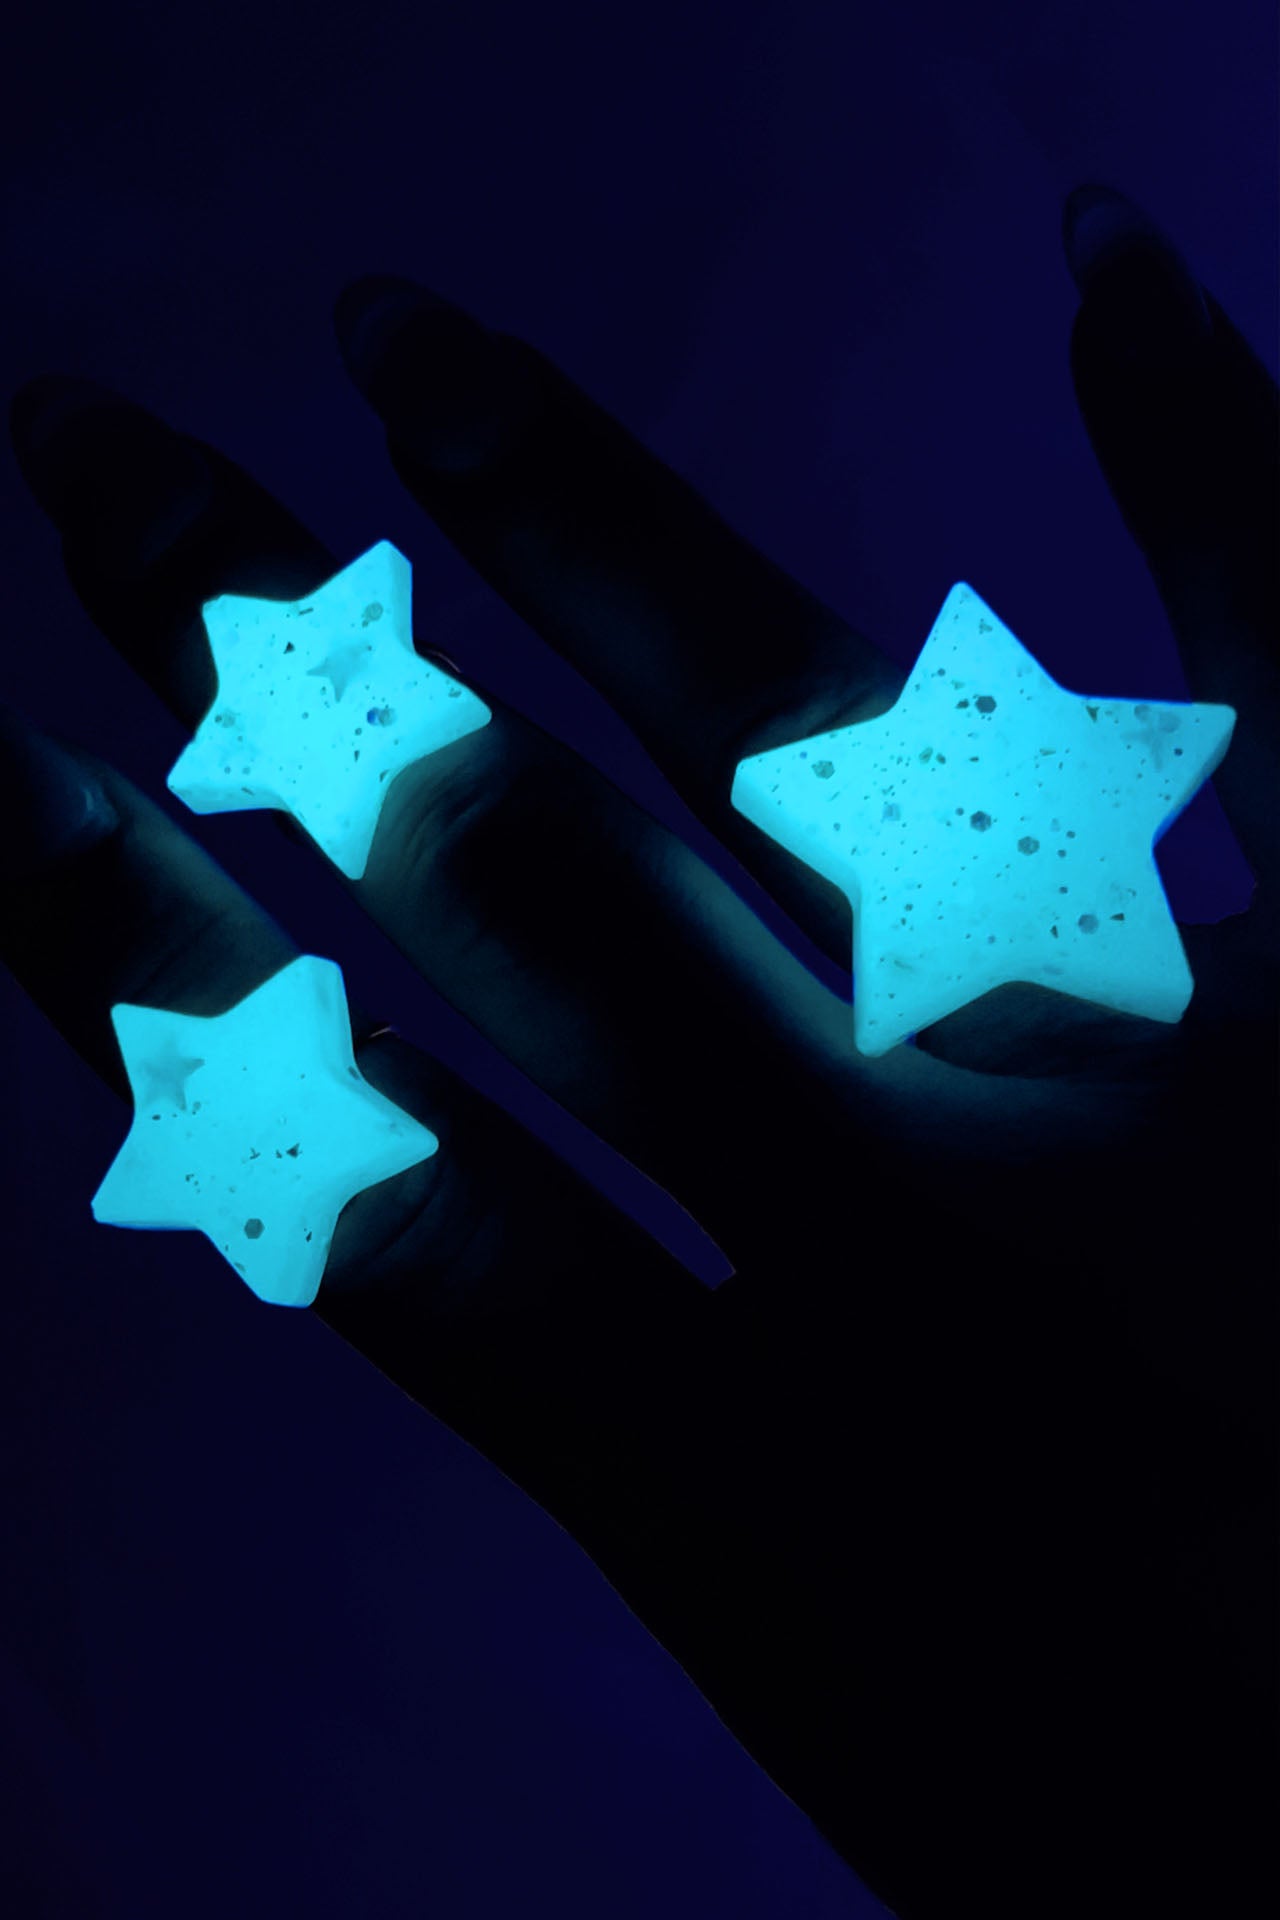 Glow Star Ring Small